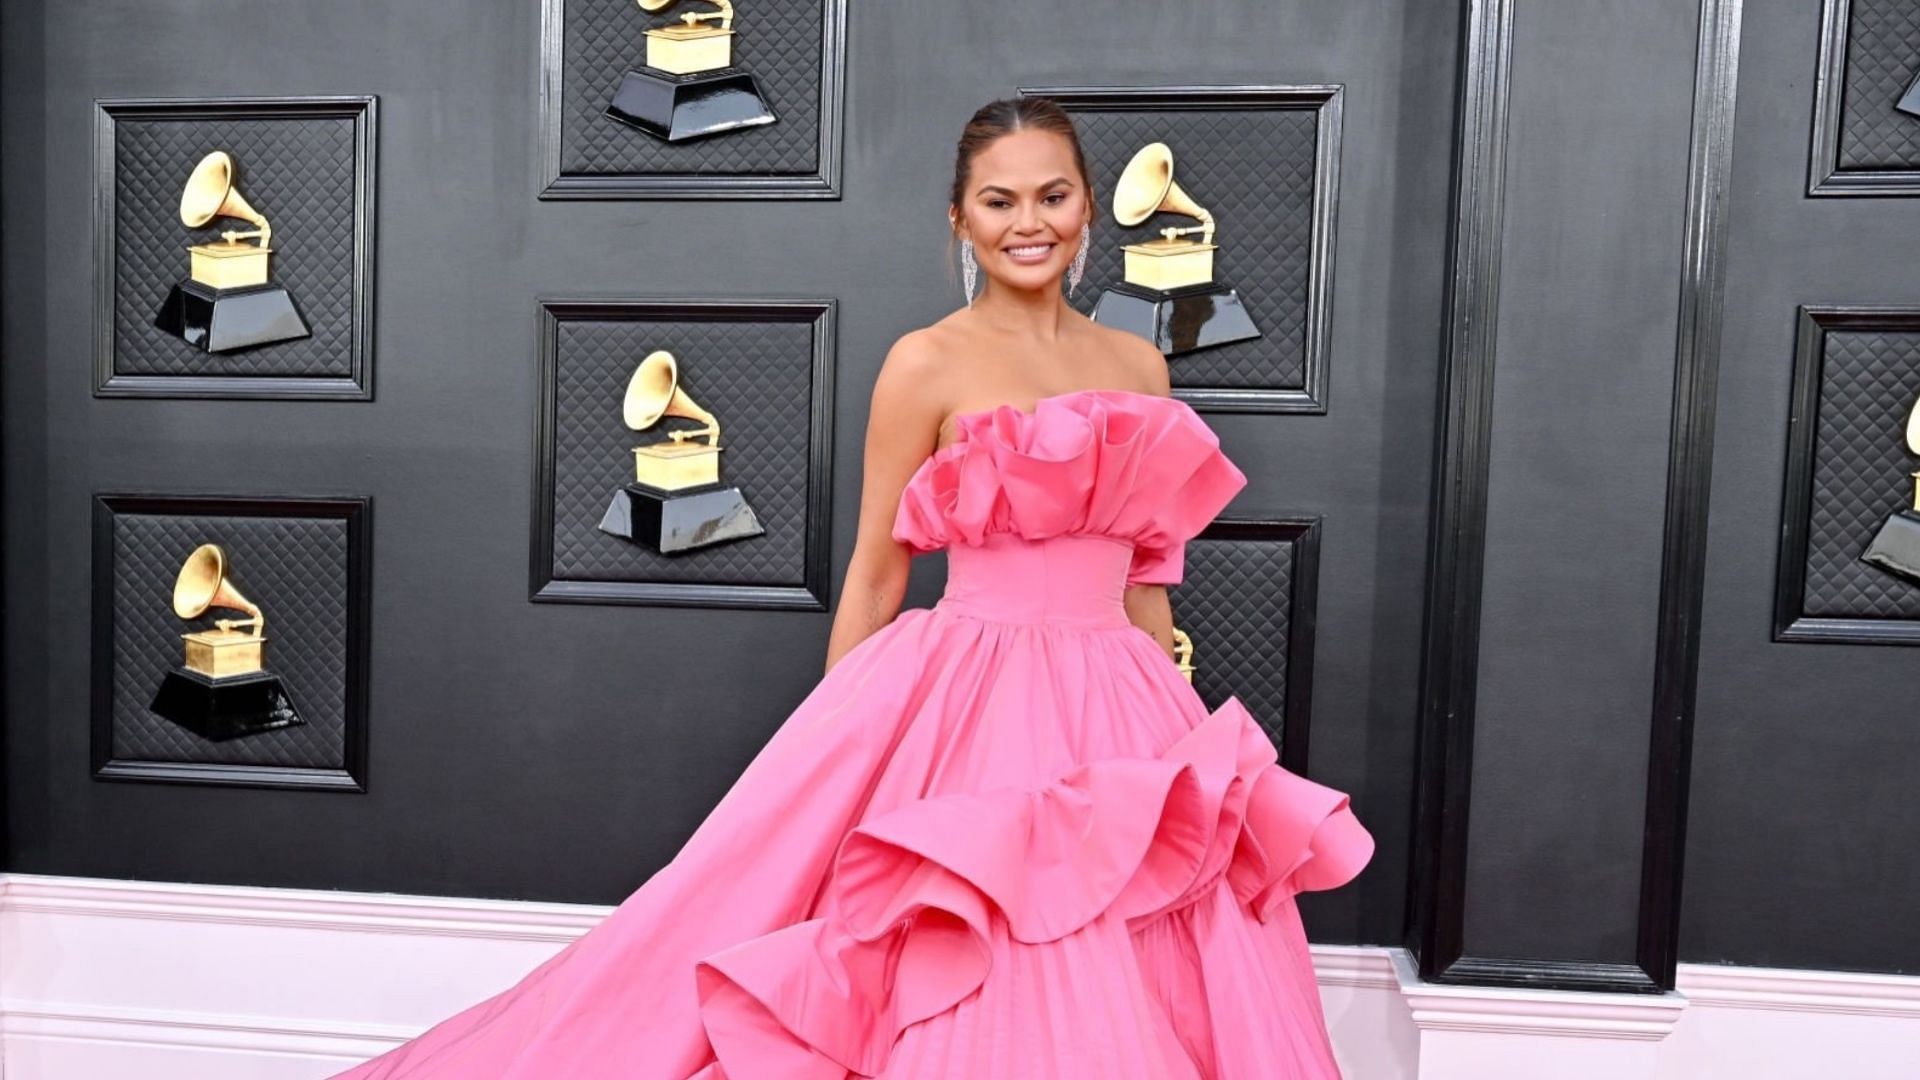 Wonderfold gets negative review-bombed over collaboration with Chrissy Teigen. (Image via Axelle/Bauer-Griffin/Getty Images)